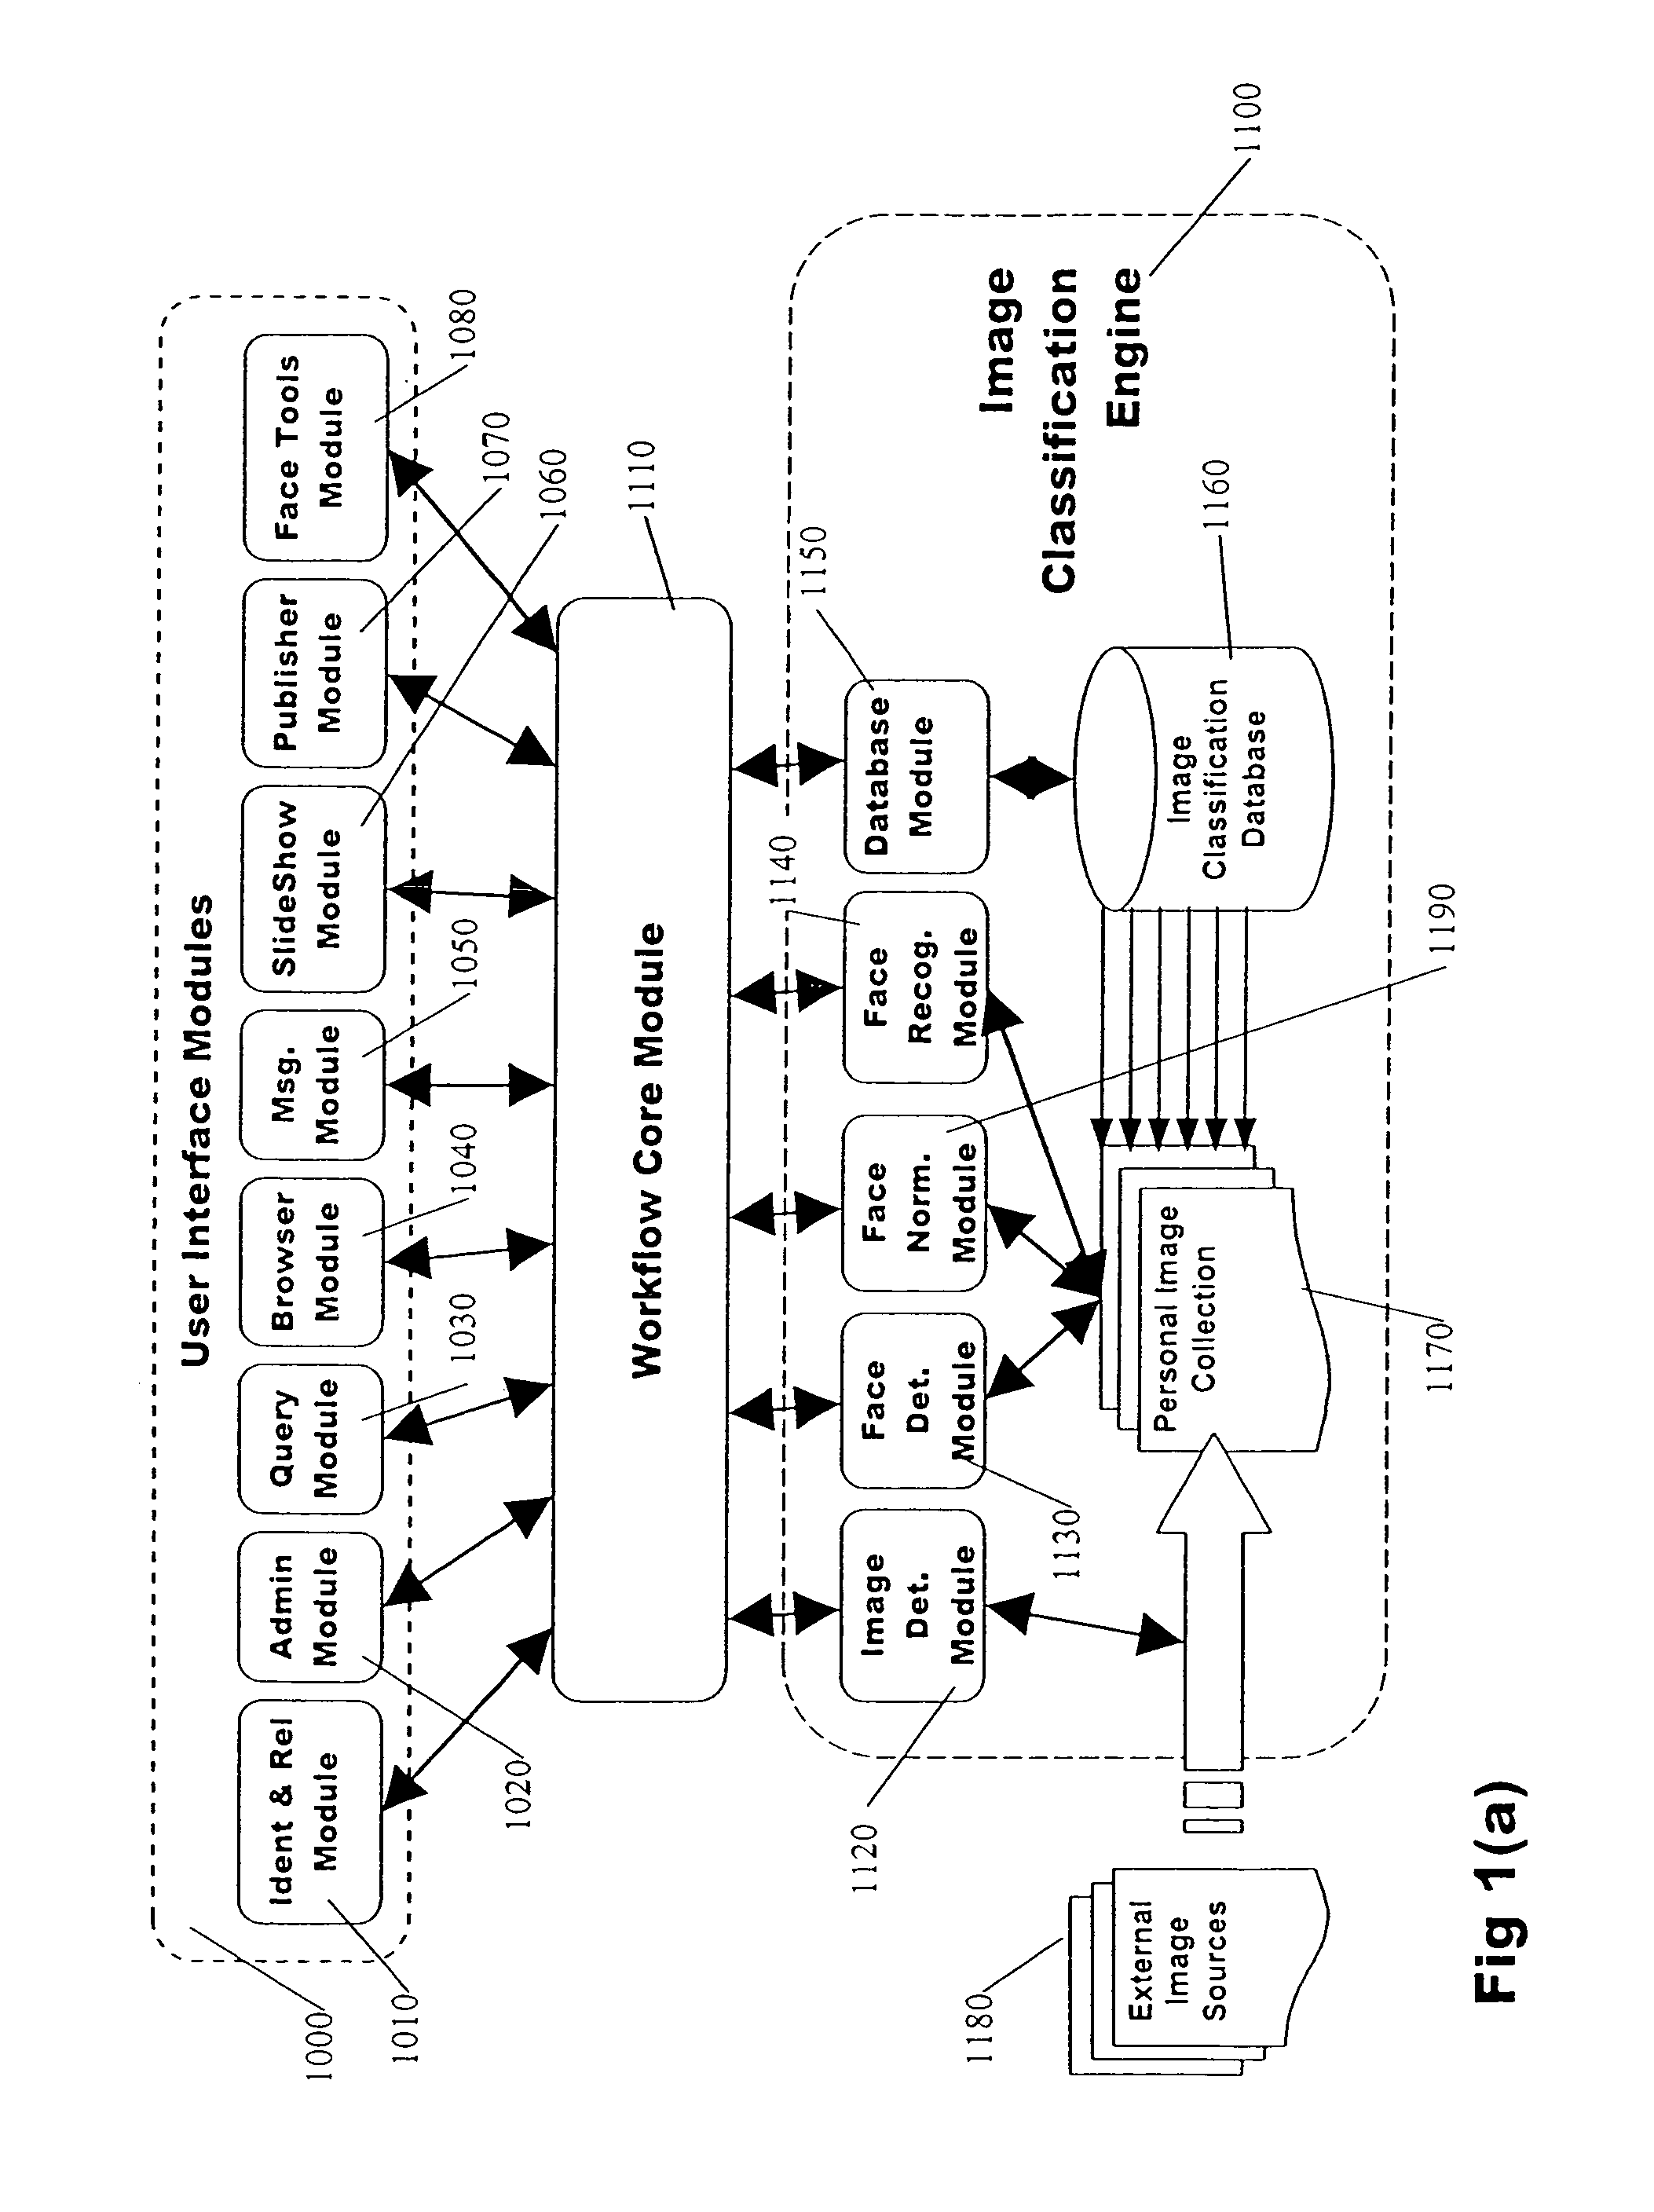 Classification system for consumer digital images using workflow and user interface modules, and face detection and recognition